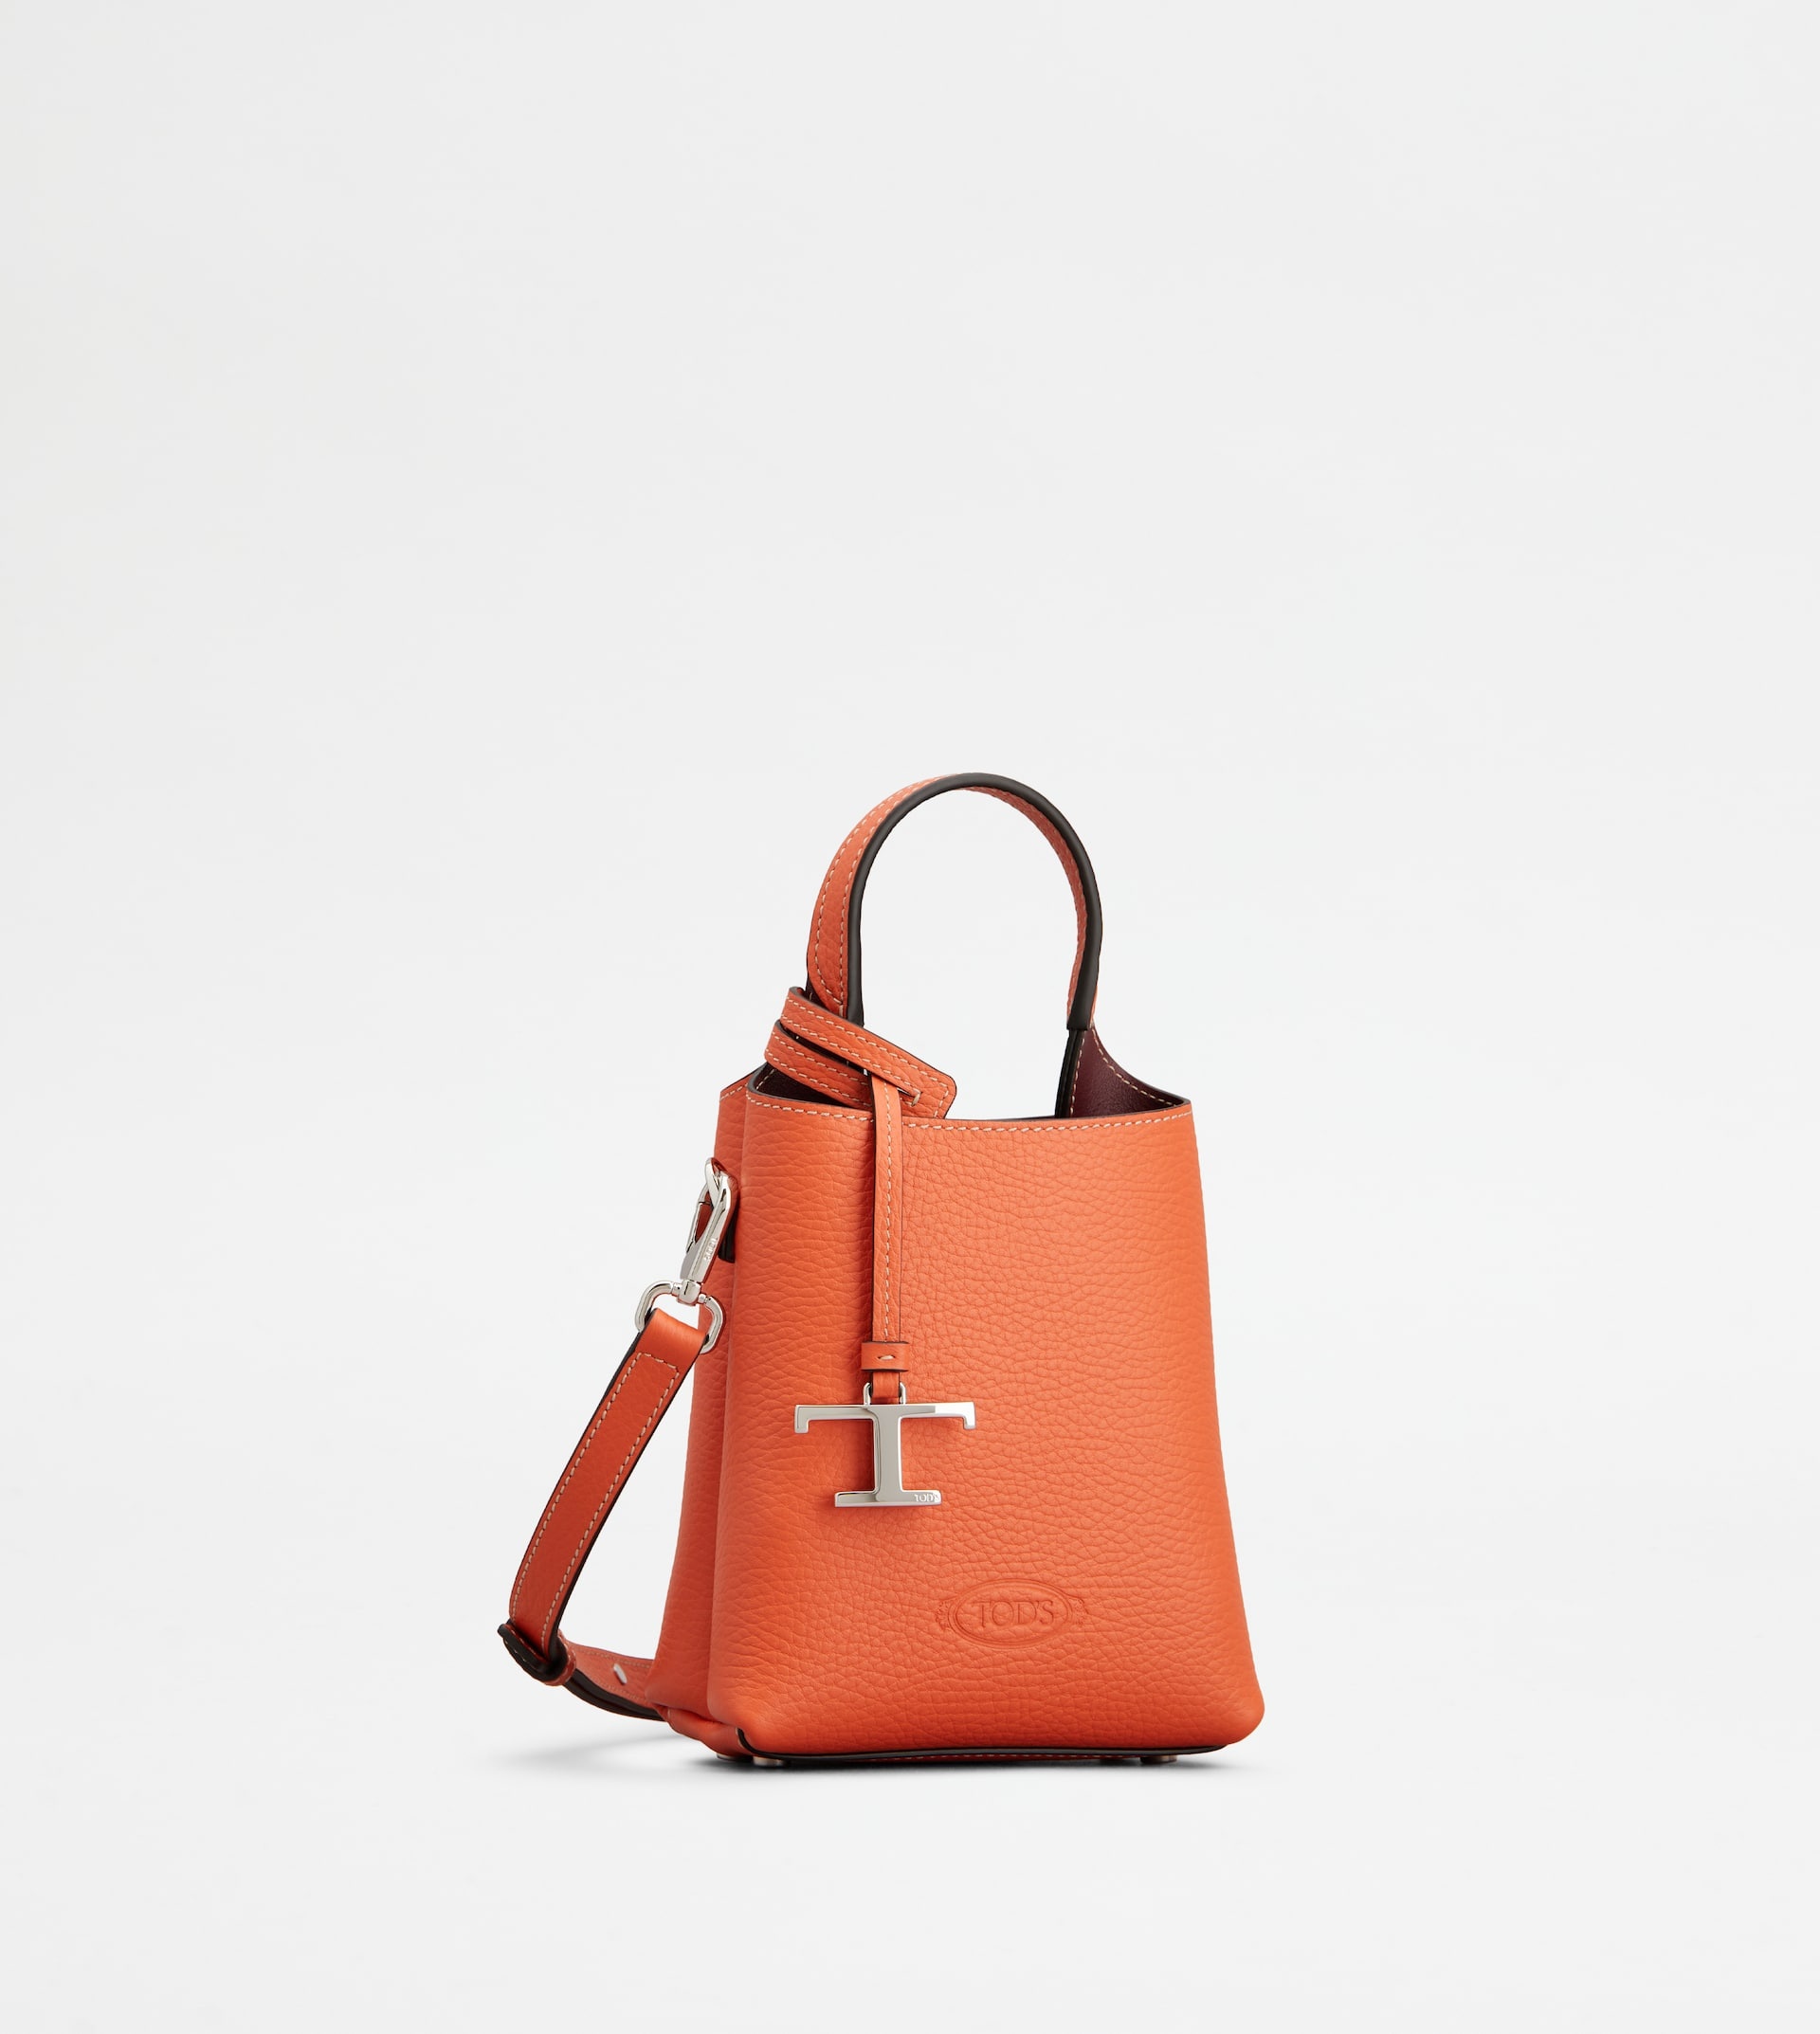 TOD'S MICRO BAG IN LEATHER - RED - 2